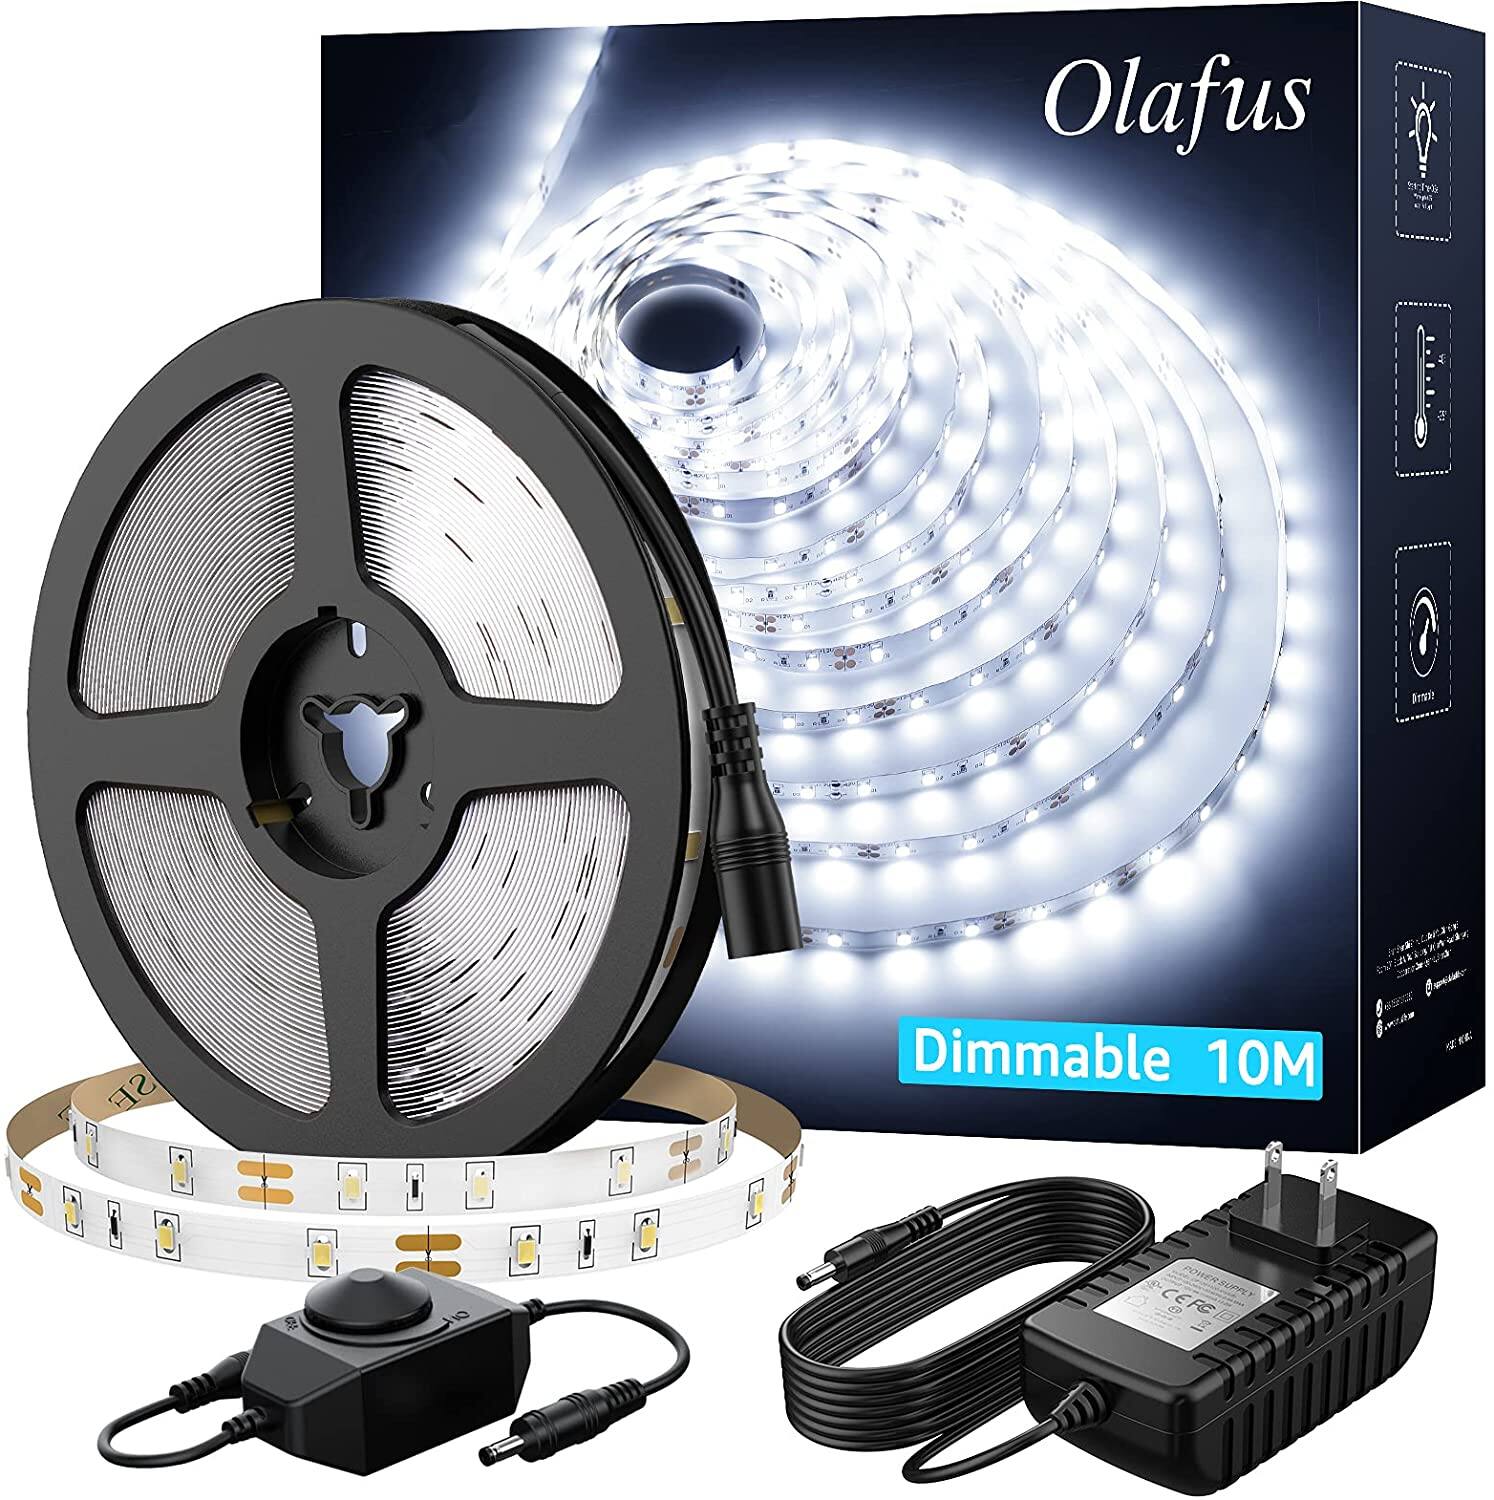 Olafus 32.8ft Dimmable White LED Strip Lights  - $13.19 +FS